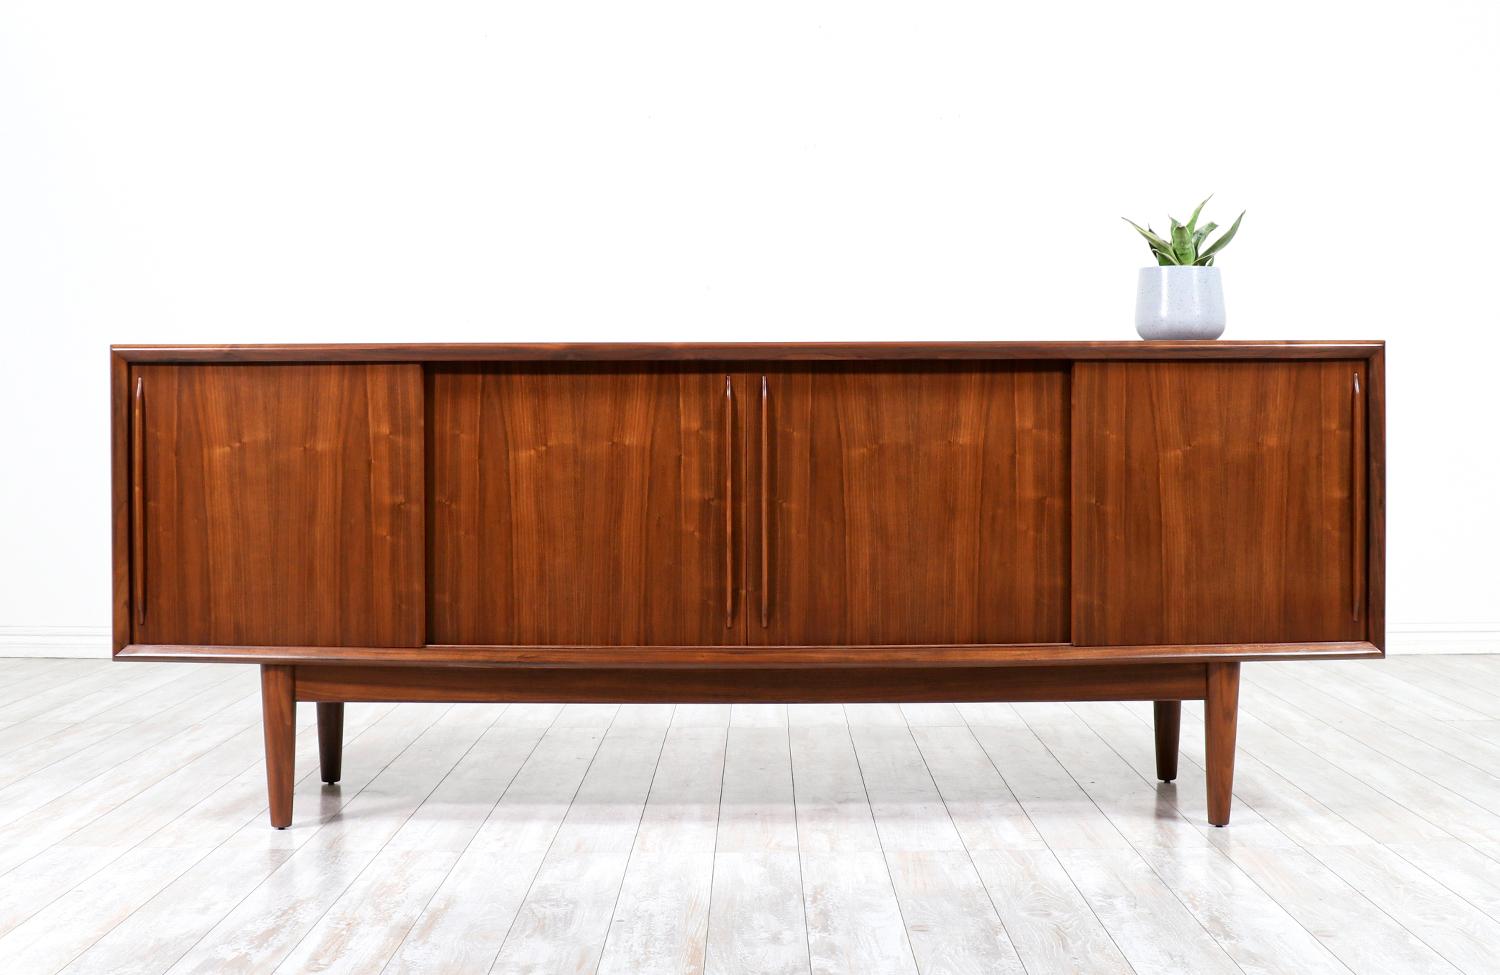 An impressive Scandinavian credenza designed by Svend A. Madsen in collaboration with the workshop of H.P. Hansen in Denmark during the 1960s. This gorgeous design features a walnut wood curved front case with four dovetailed drawers and ample